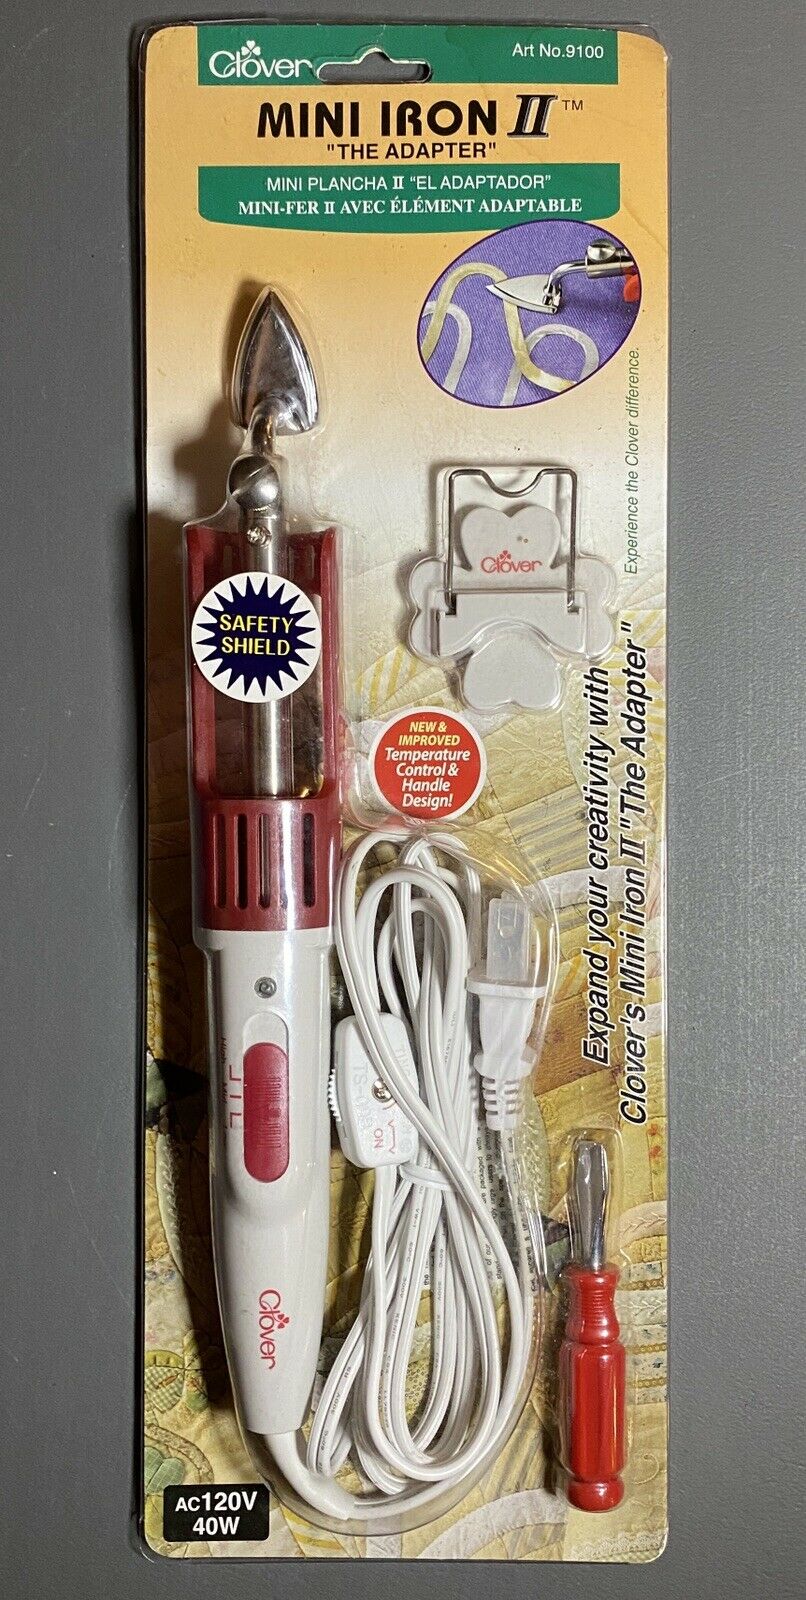 New Clover Mini Iron Ii "the Adapter" For Sewing, Quilting & Crafting 9100 Nip